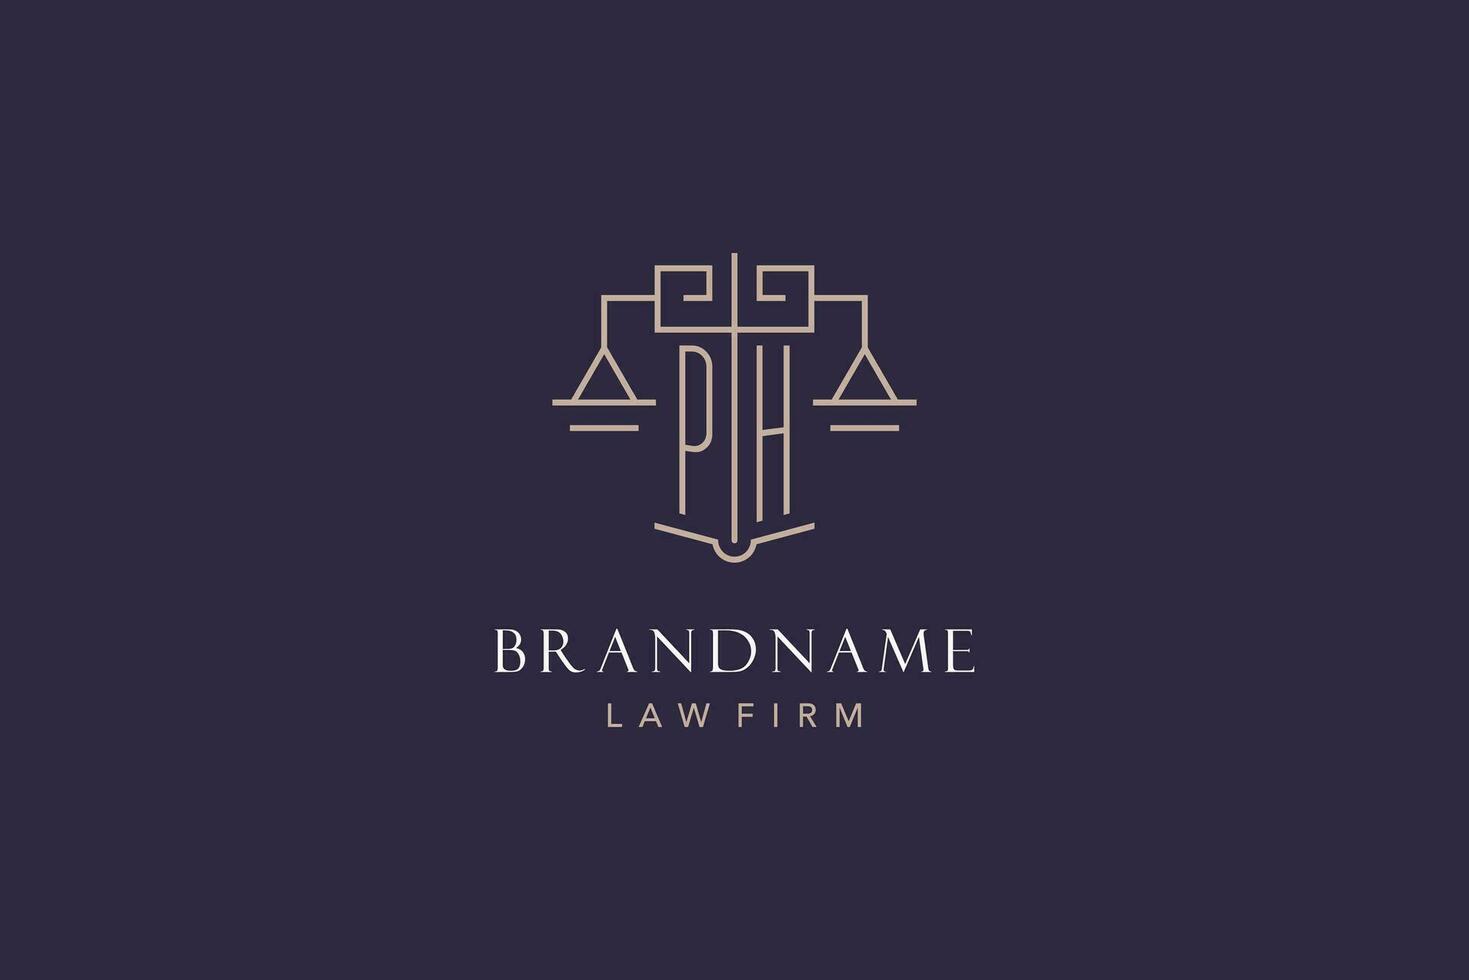 Initial letter PH logo with scale of justice logo design, luxury legal logo geometric style vector